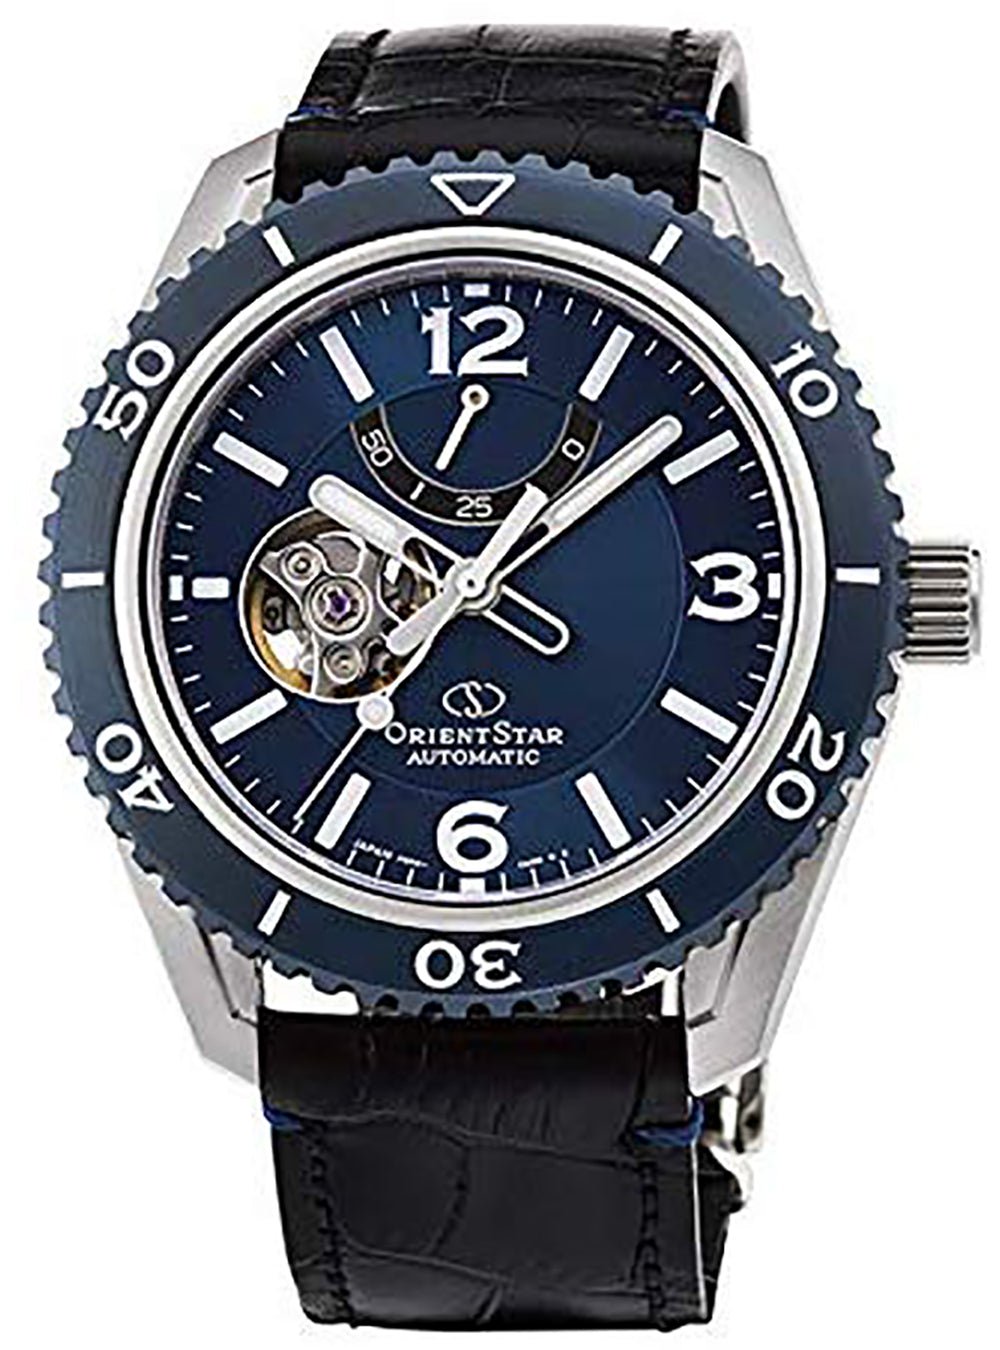 ORIENT STAR SPORTS COLLECTION SEMI SKELETON RK-AT0108L MADE IN 